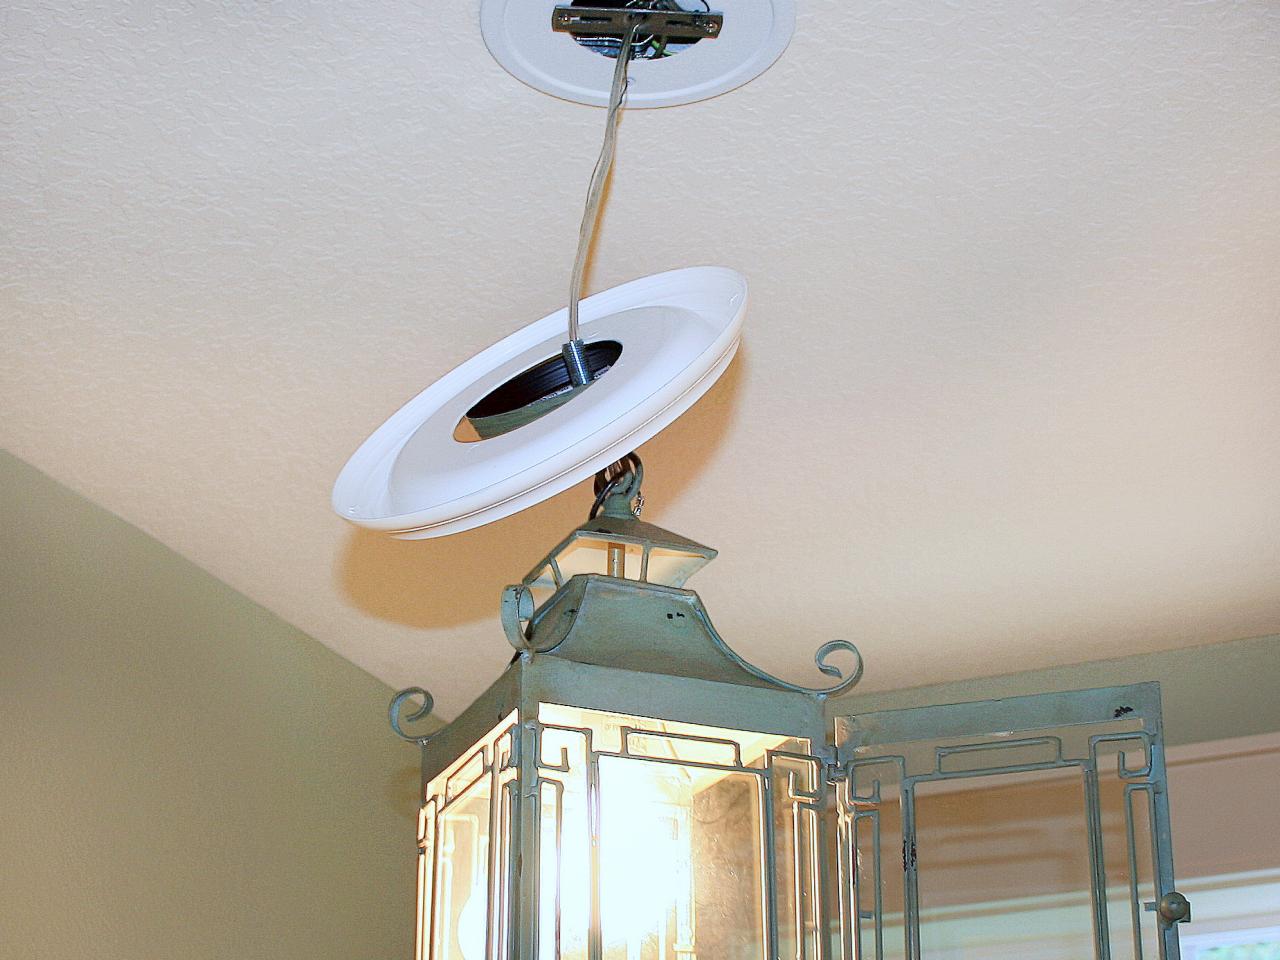 Replace Recessed Light With A Pendant, How Do You Install A Hanging Light Fixture With Chain